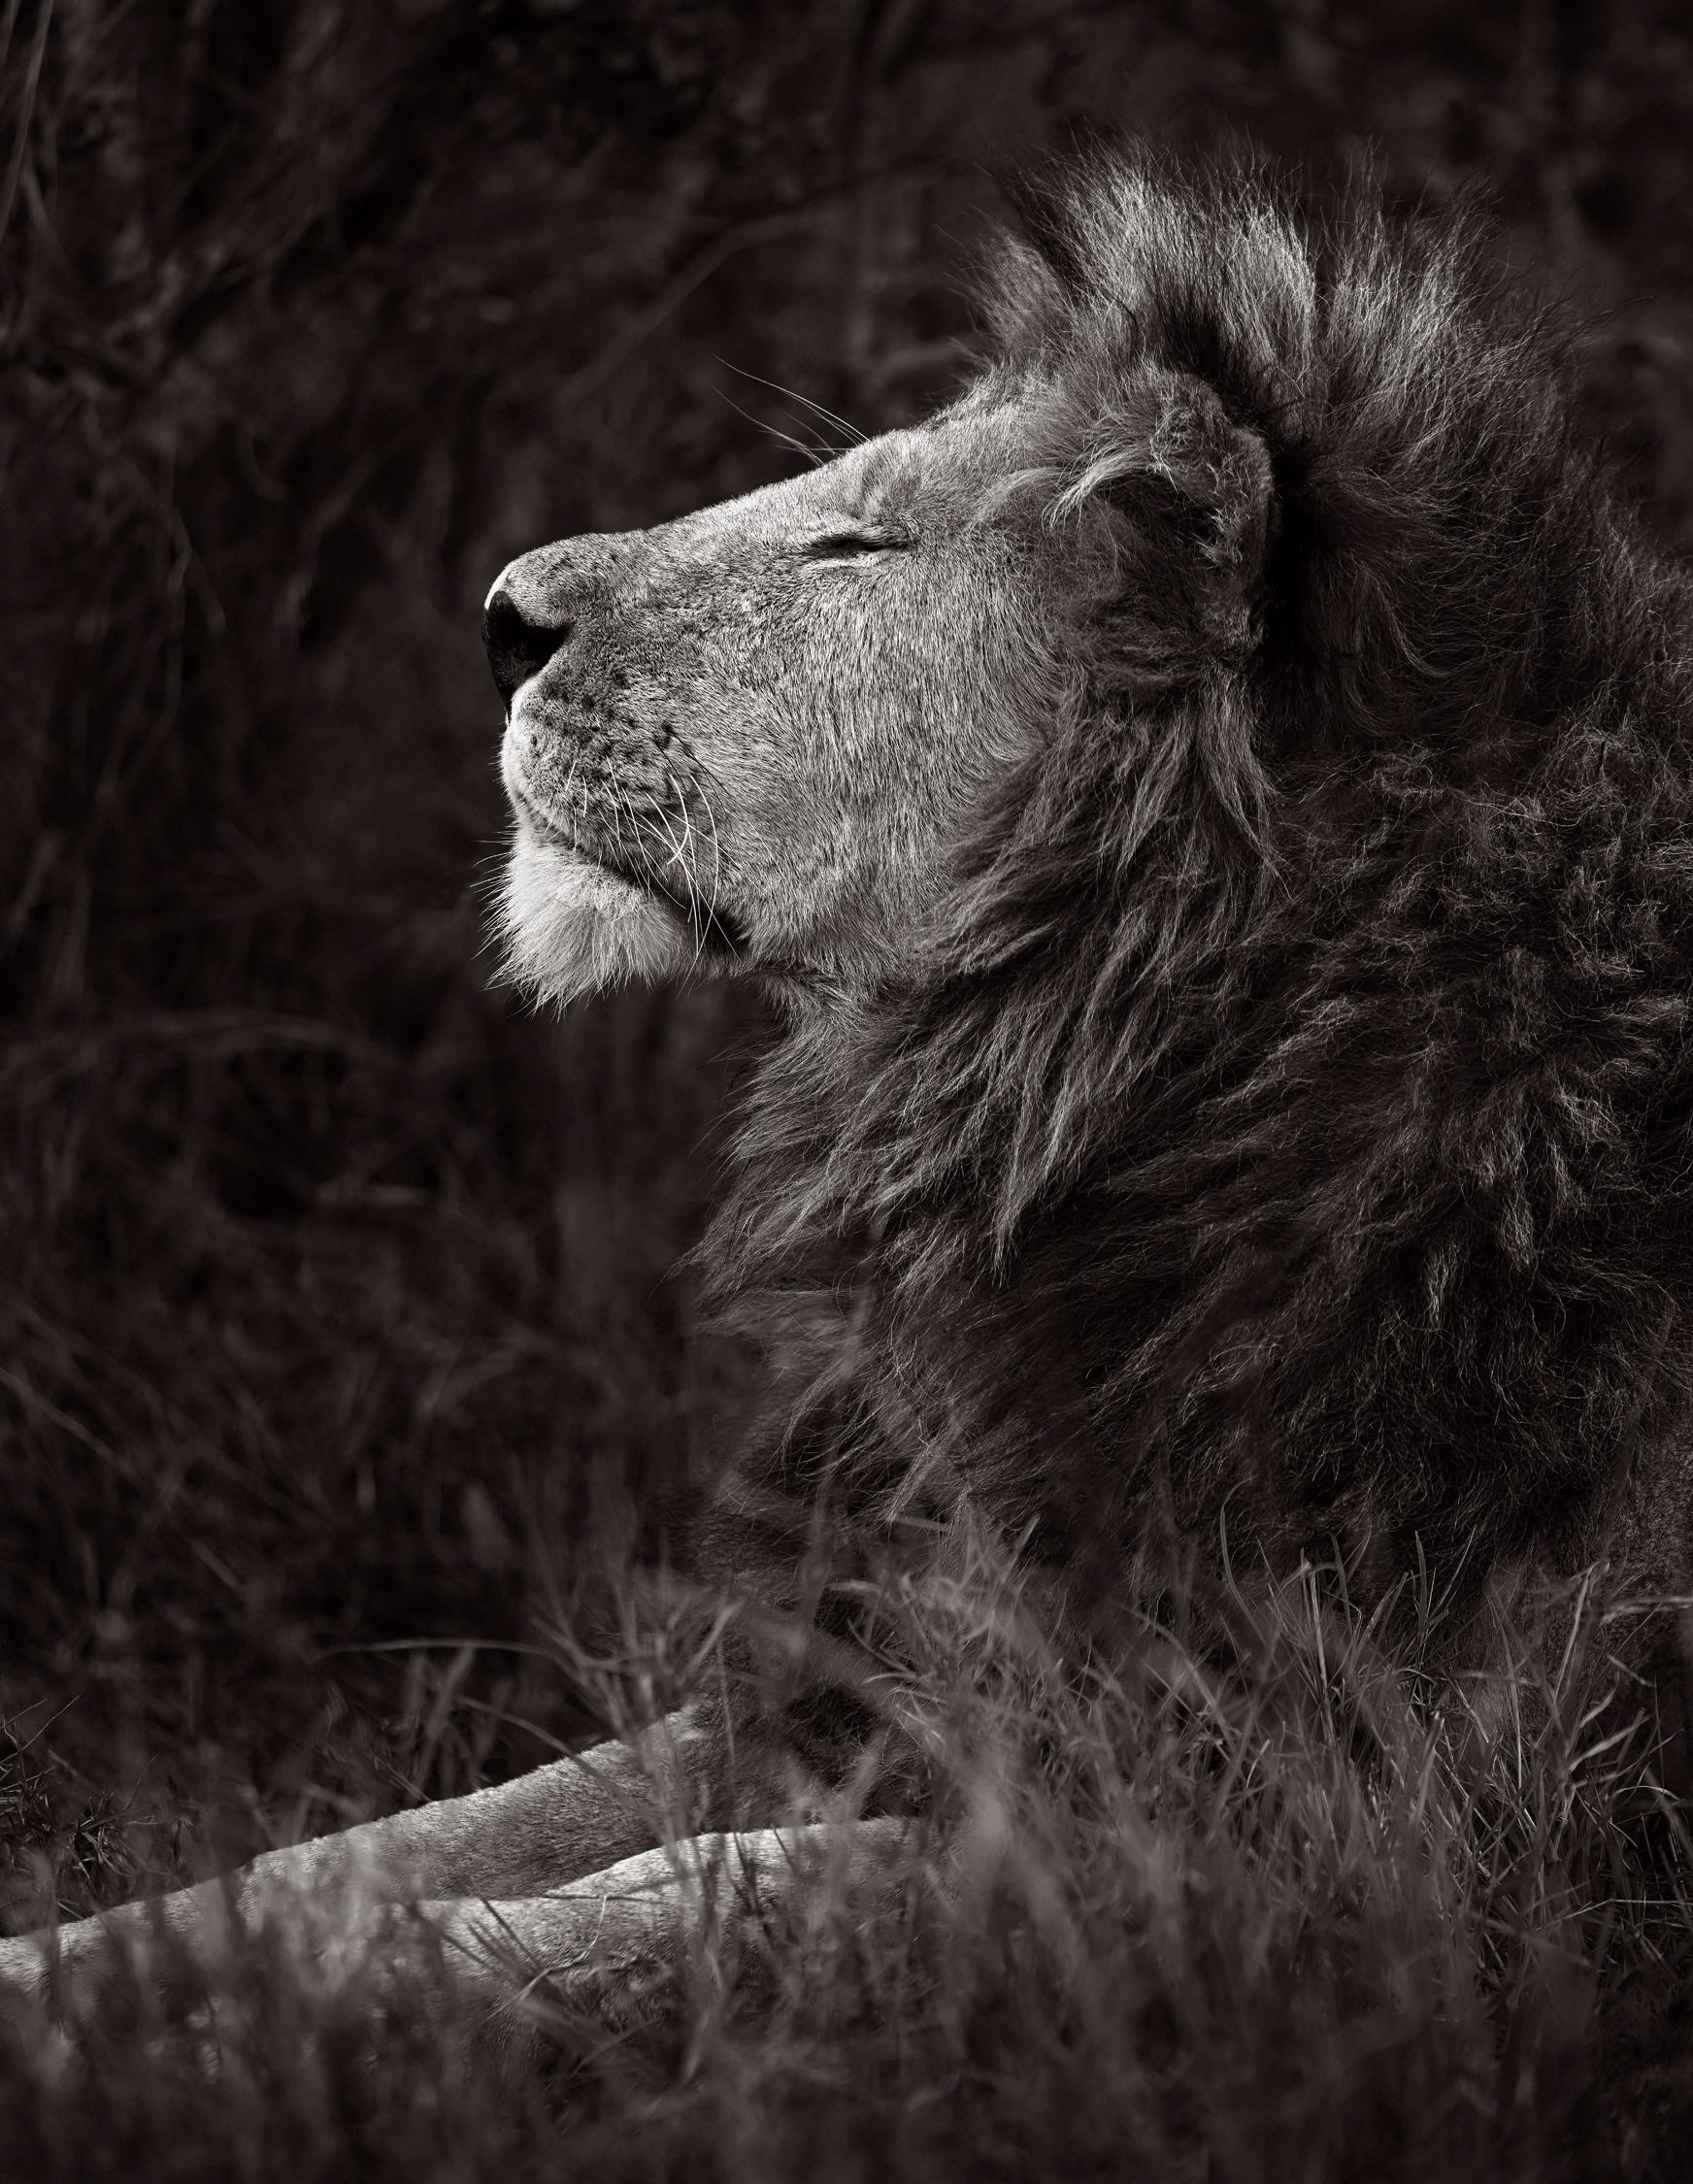 Drew Doggett Black and White Photograph - Portrait in Profile of a Lion with a Full Mane Relaxing the Grass